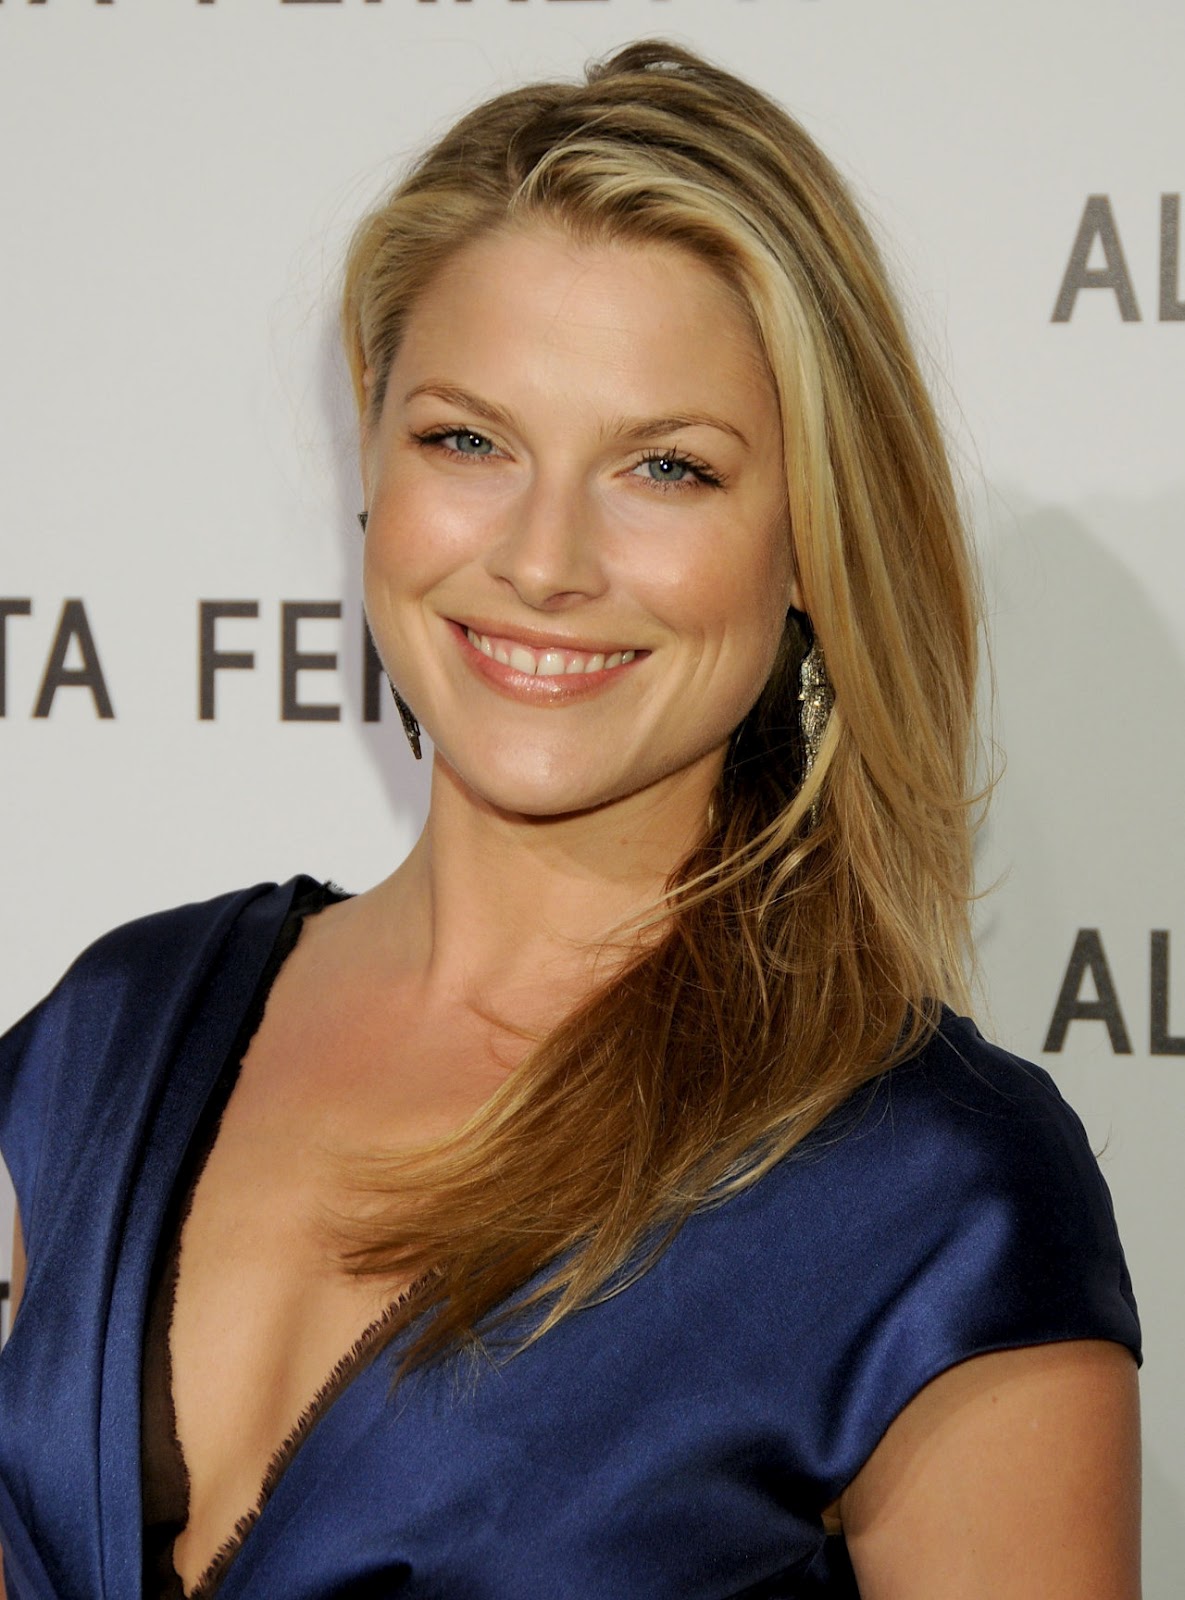 All About Hollywood Stars Ali Larter Profile And Pics